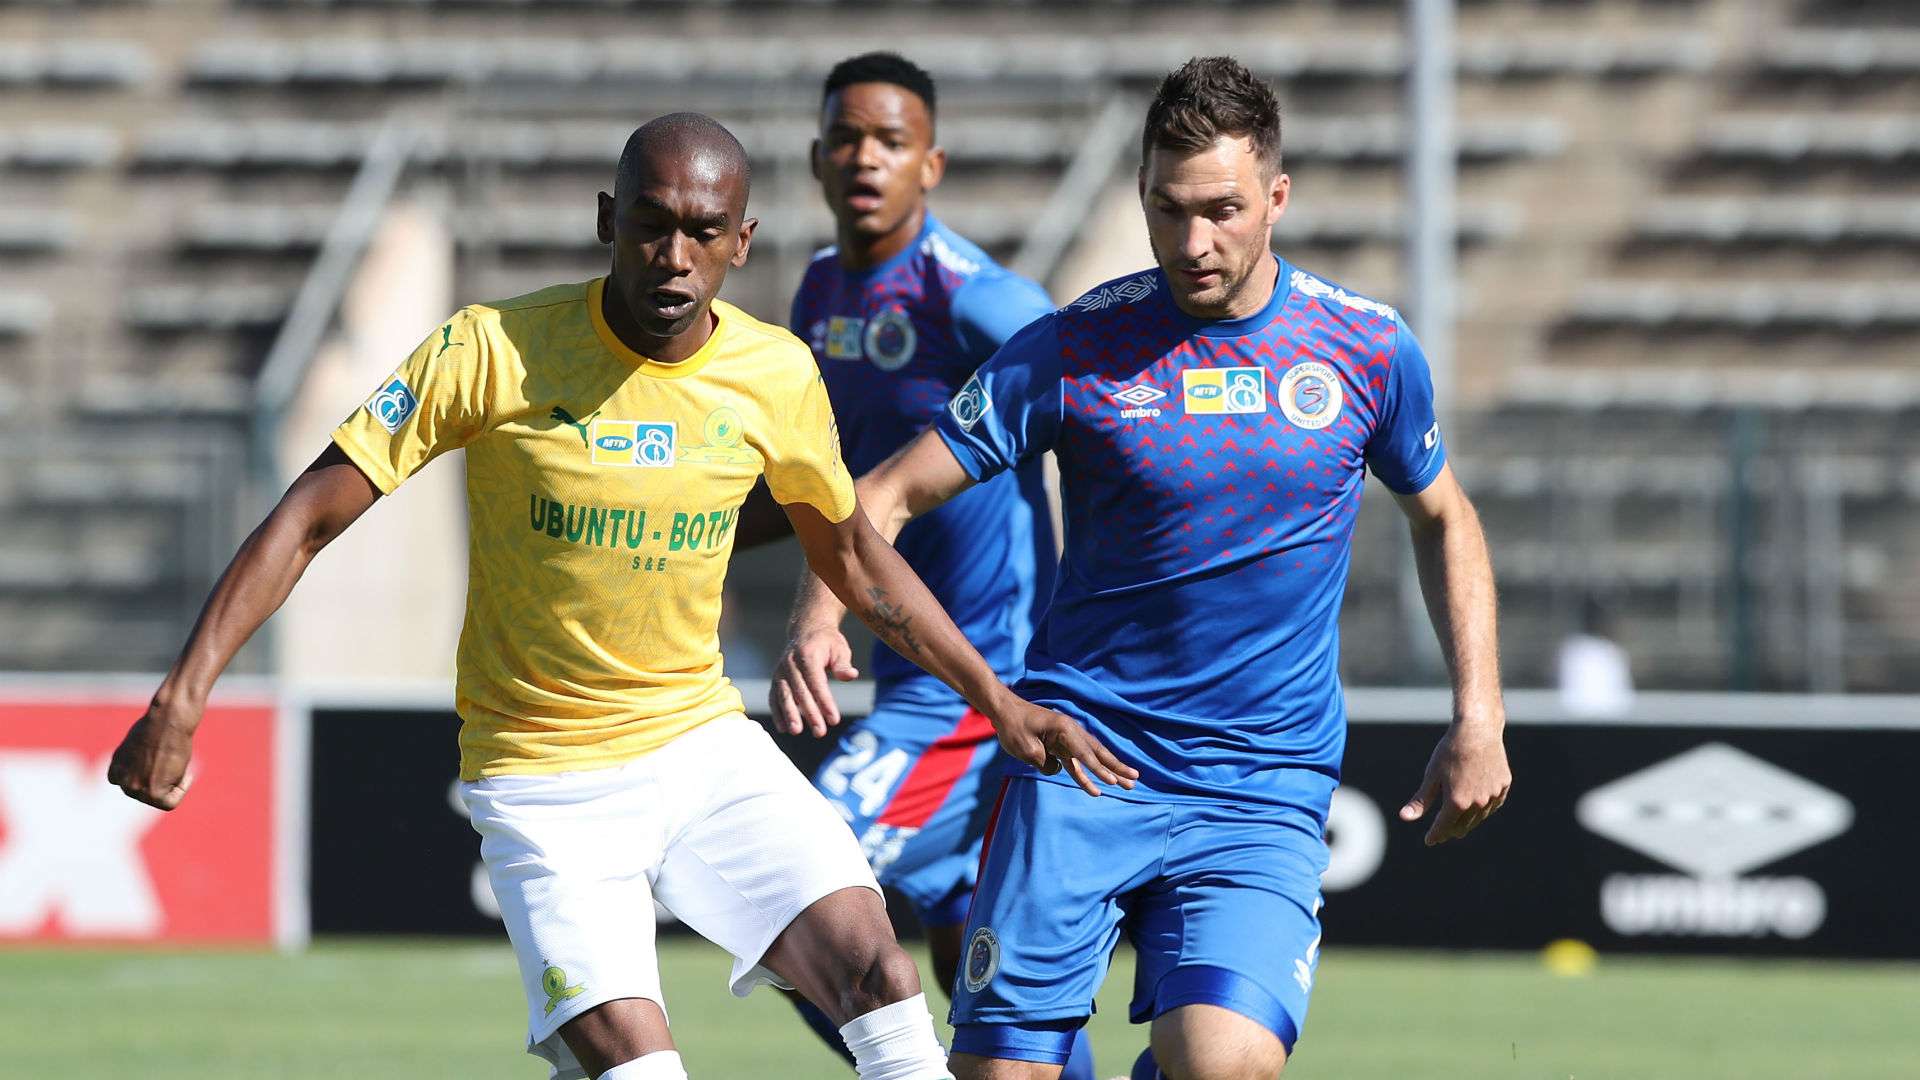 Anele Ngcongca of Mamelodi Sundowns challenged by Bradley Grobler of Supersport United, August 2019